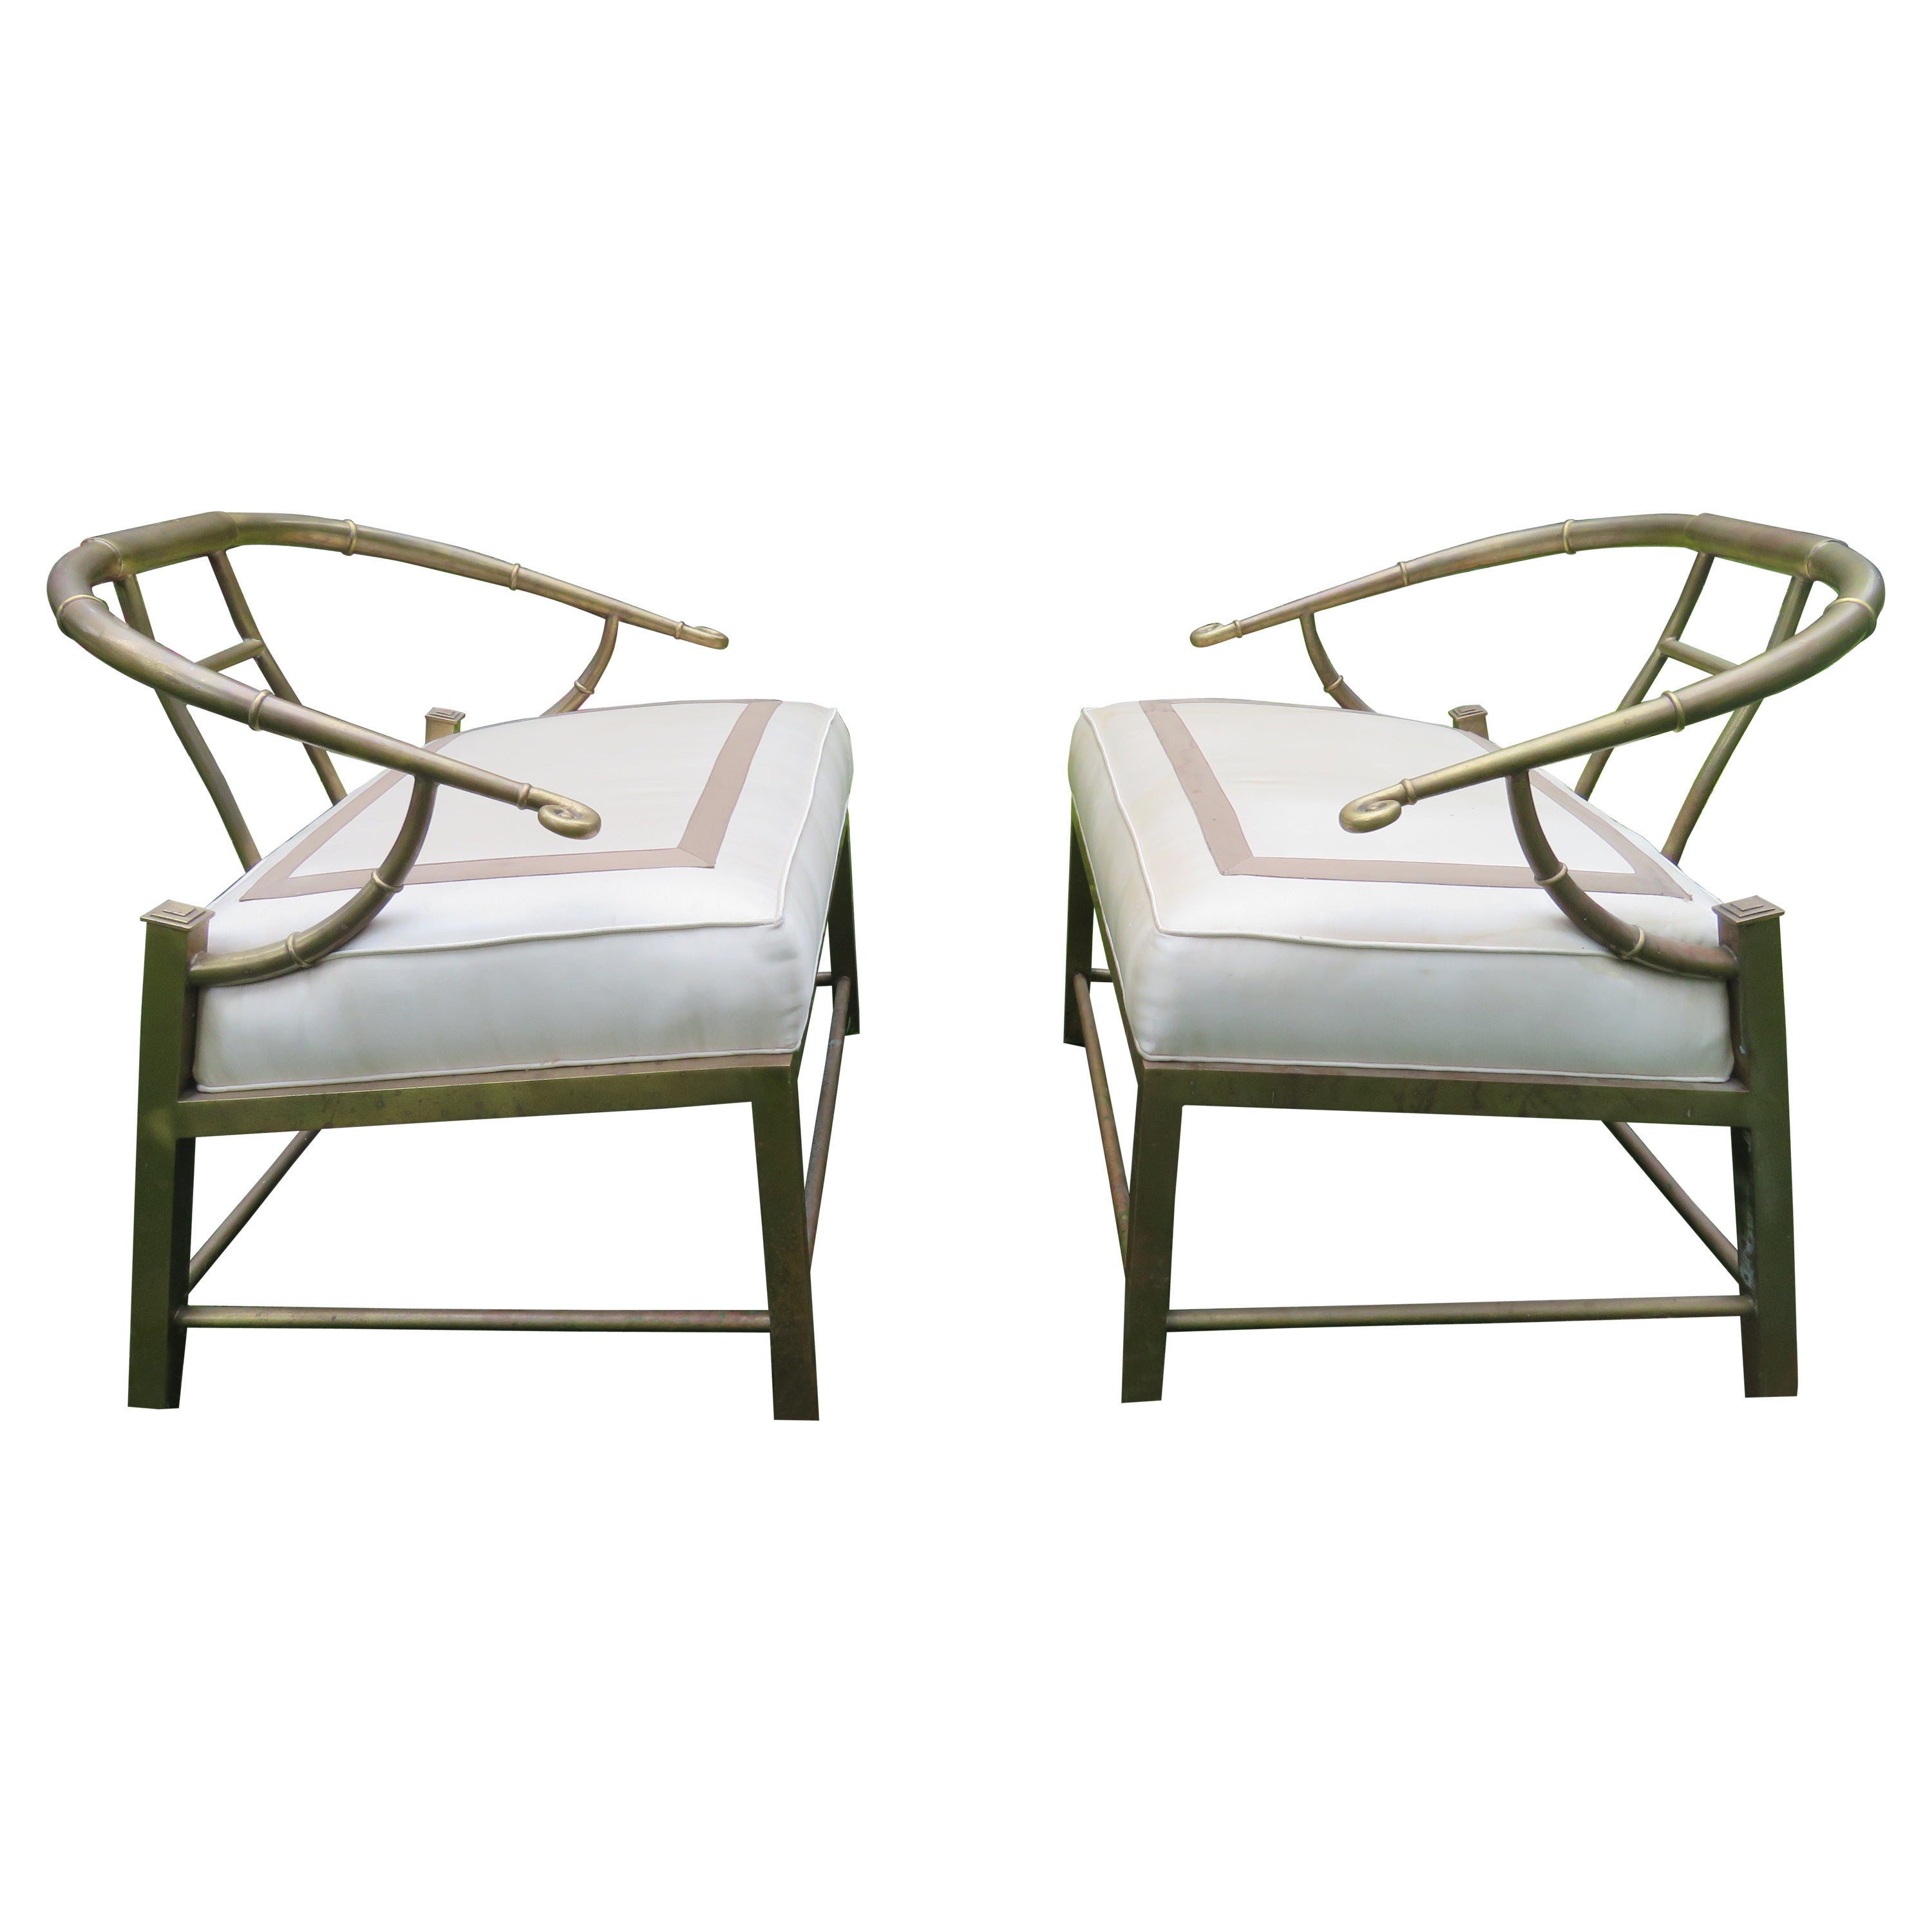 Pair Mastercraft Asian Inspired Faux Bamboo Brass Lounge Chairs, Mid-Century